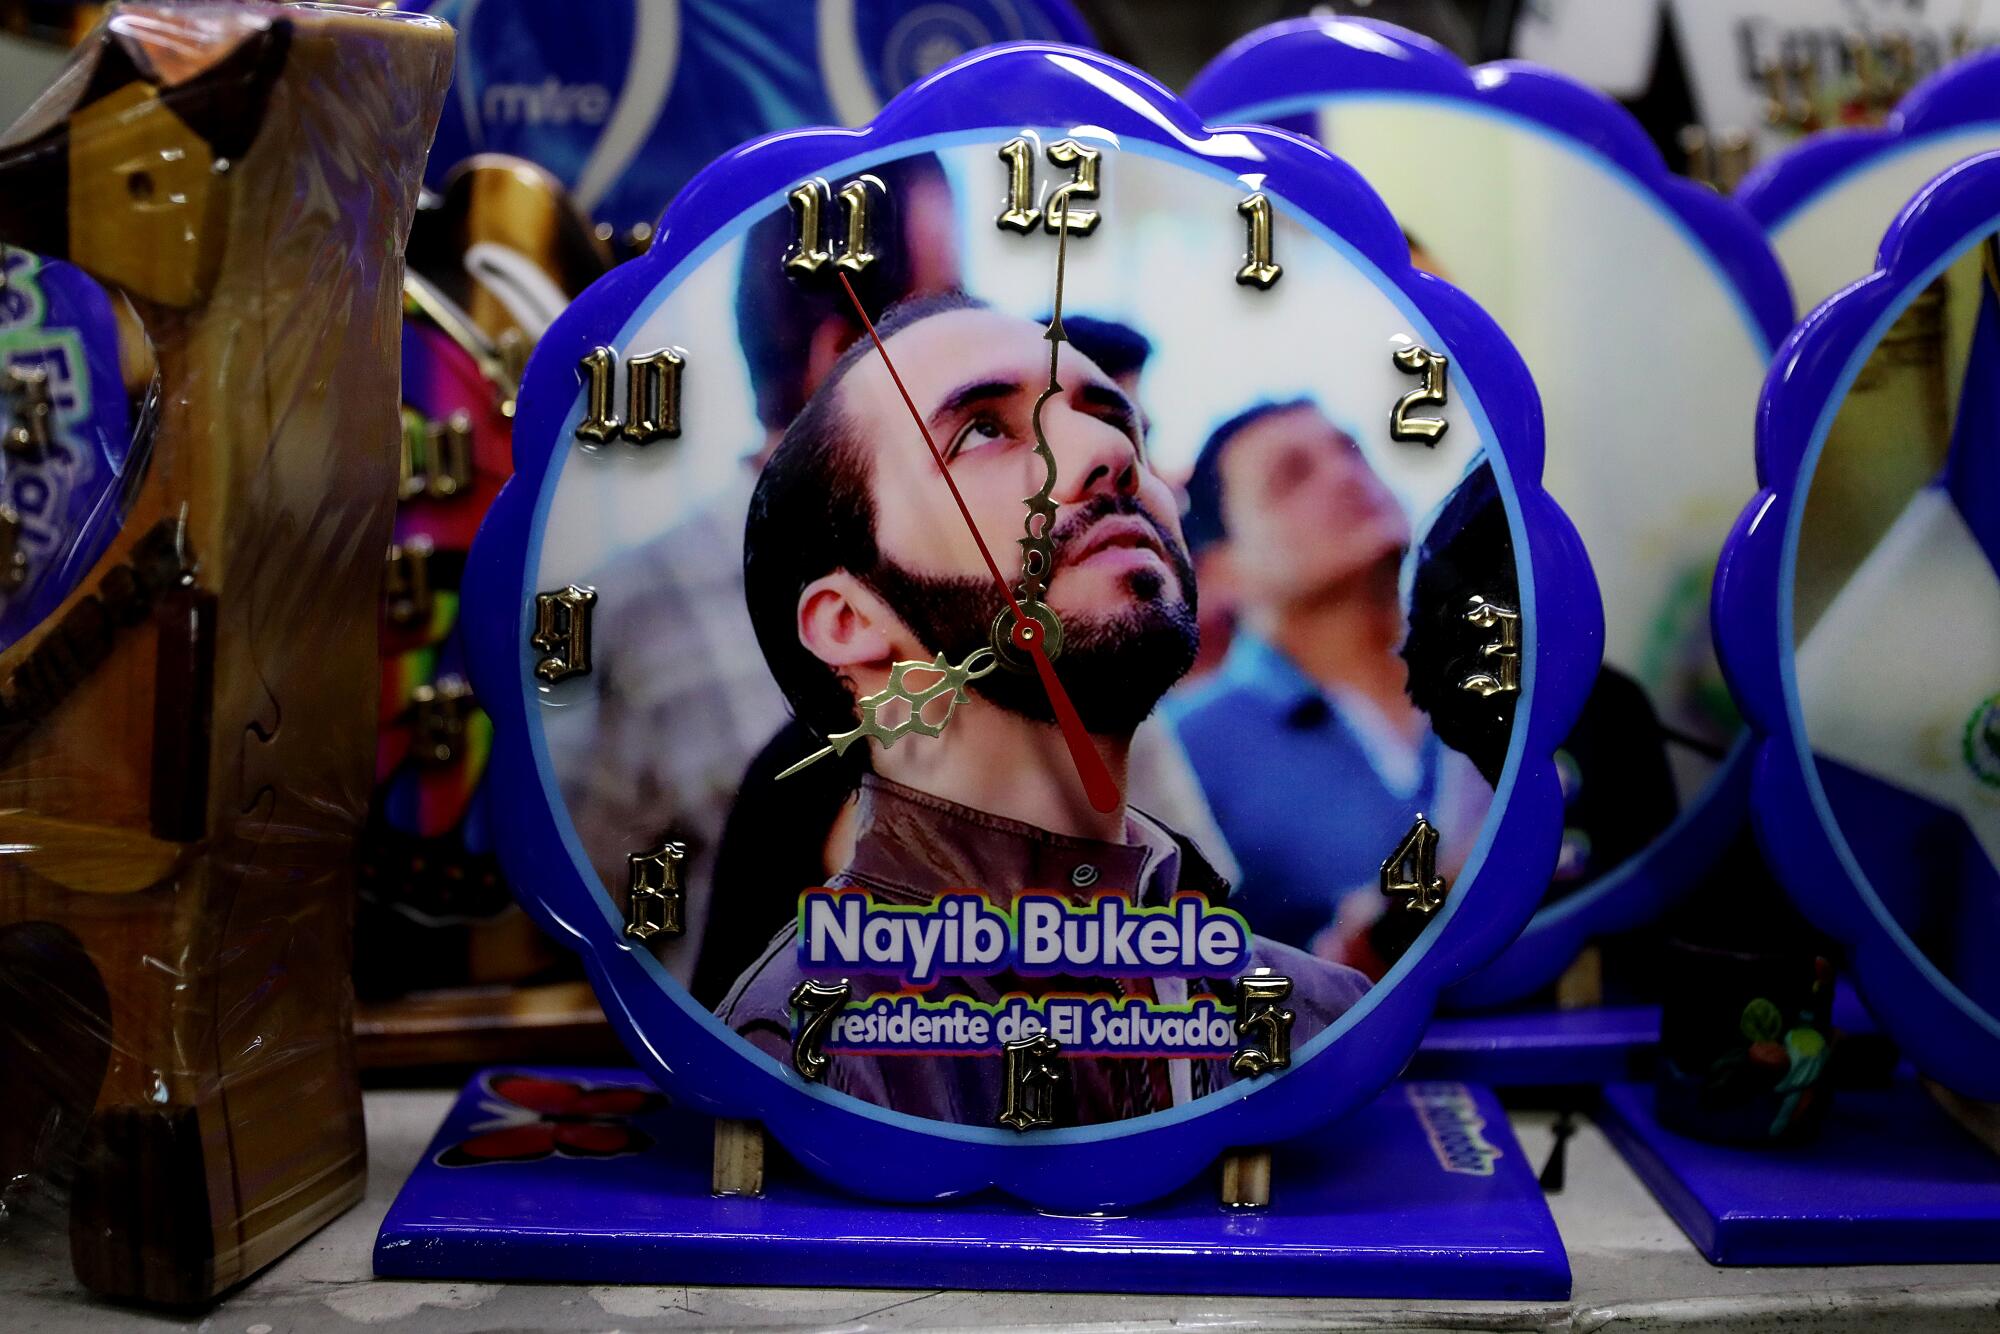 A round, purple-framed clock with an image of a bearded man looking up 